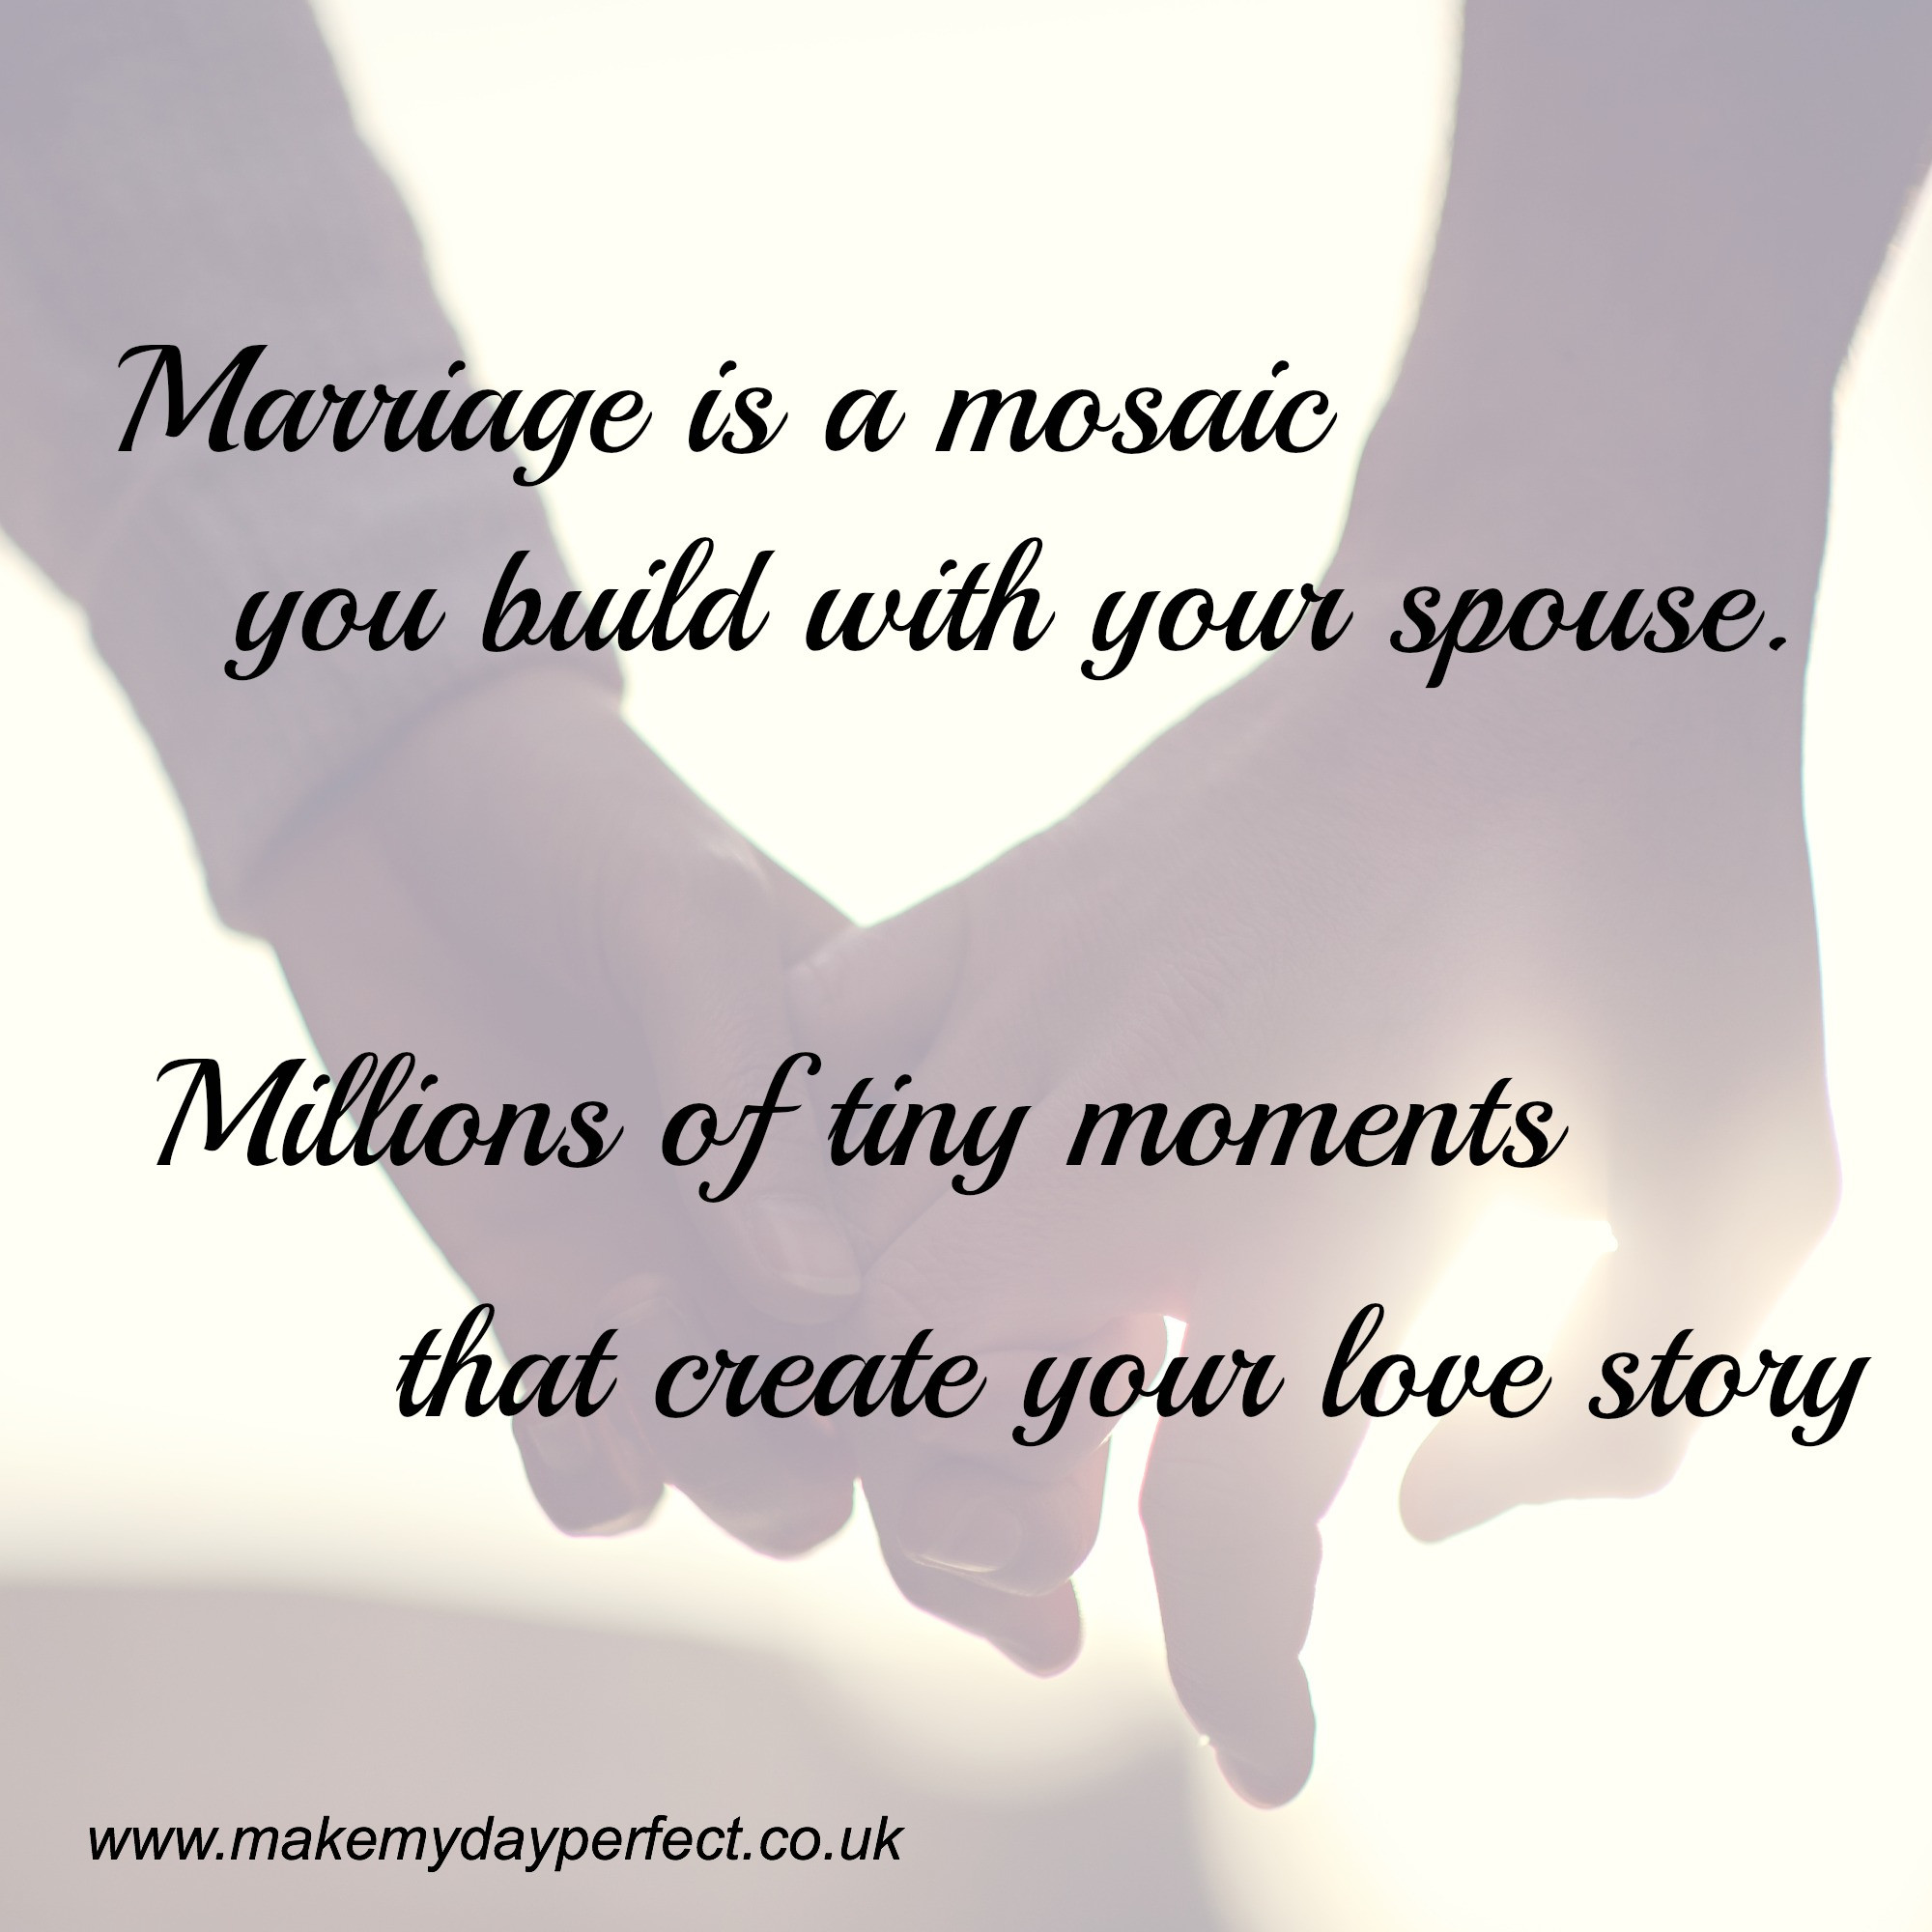 Best Marriage Quotes
 Top 5 marriage quotes that will make you smile